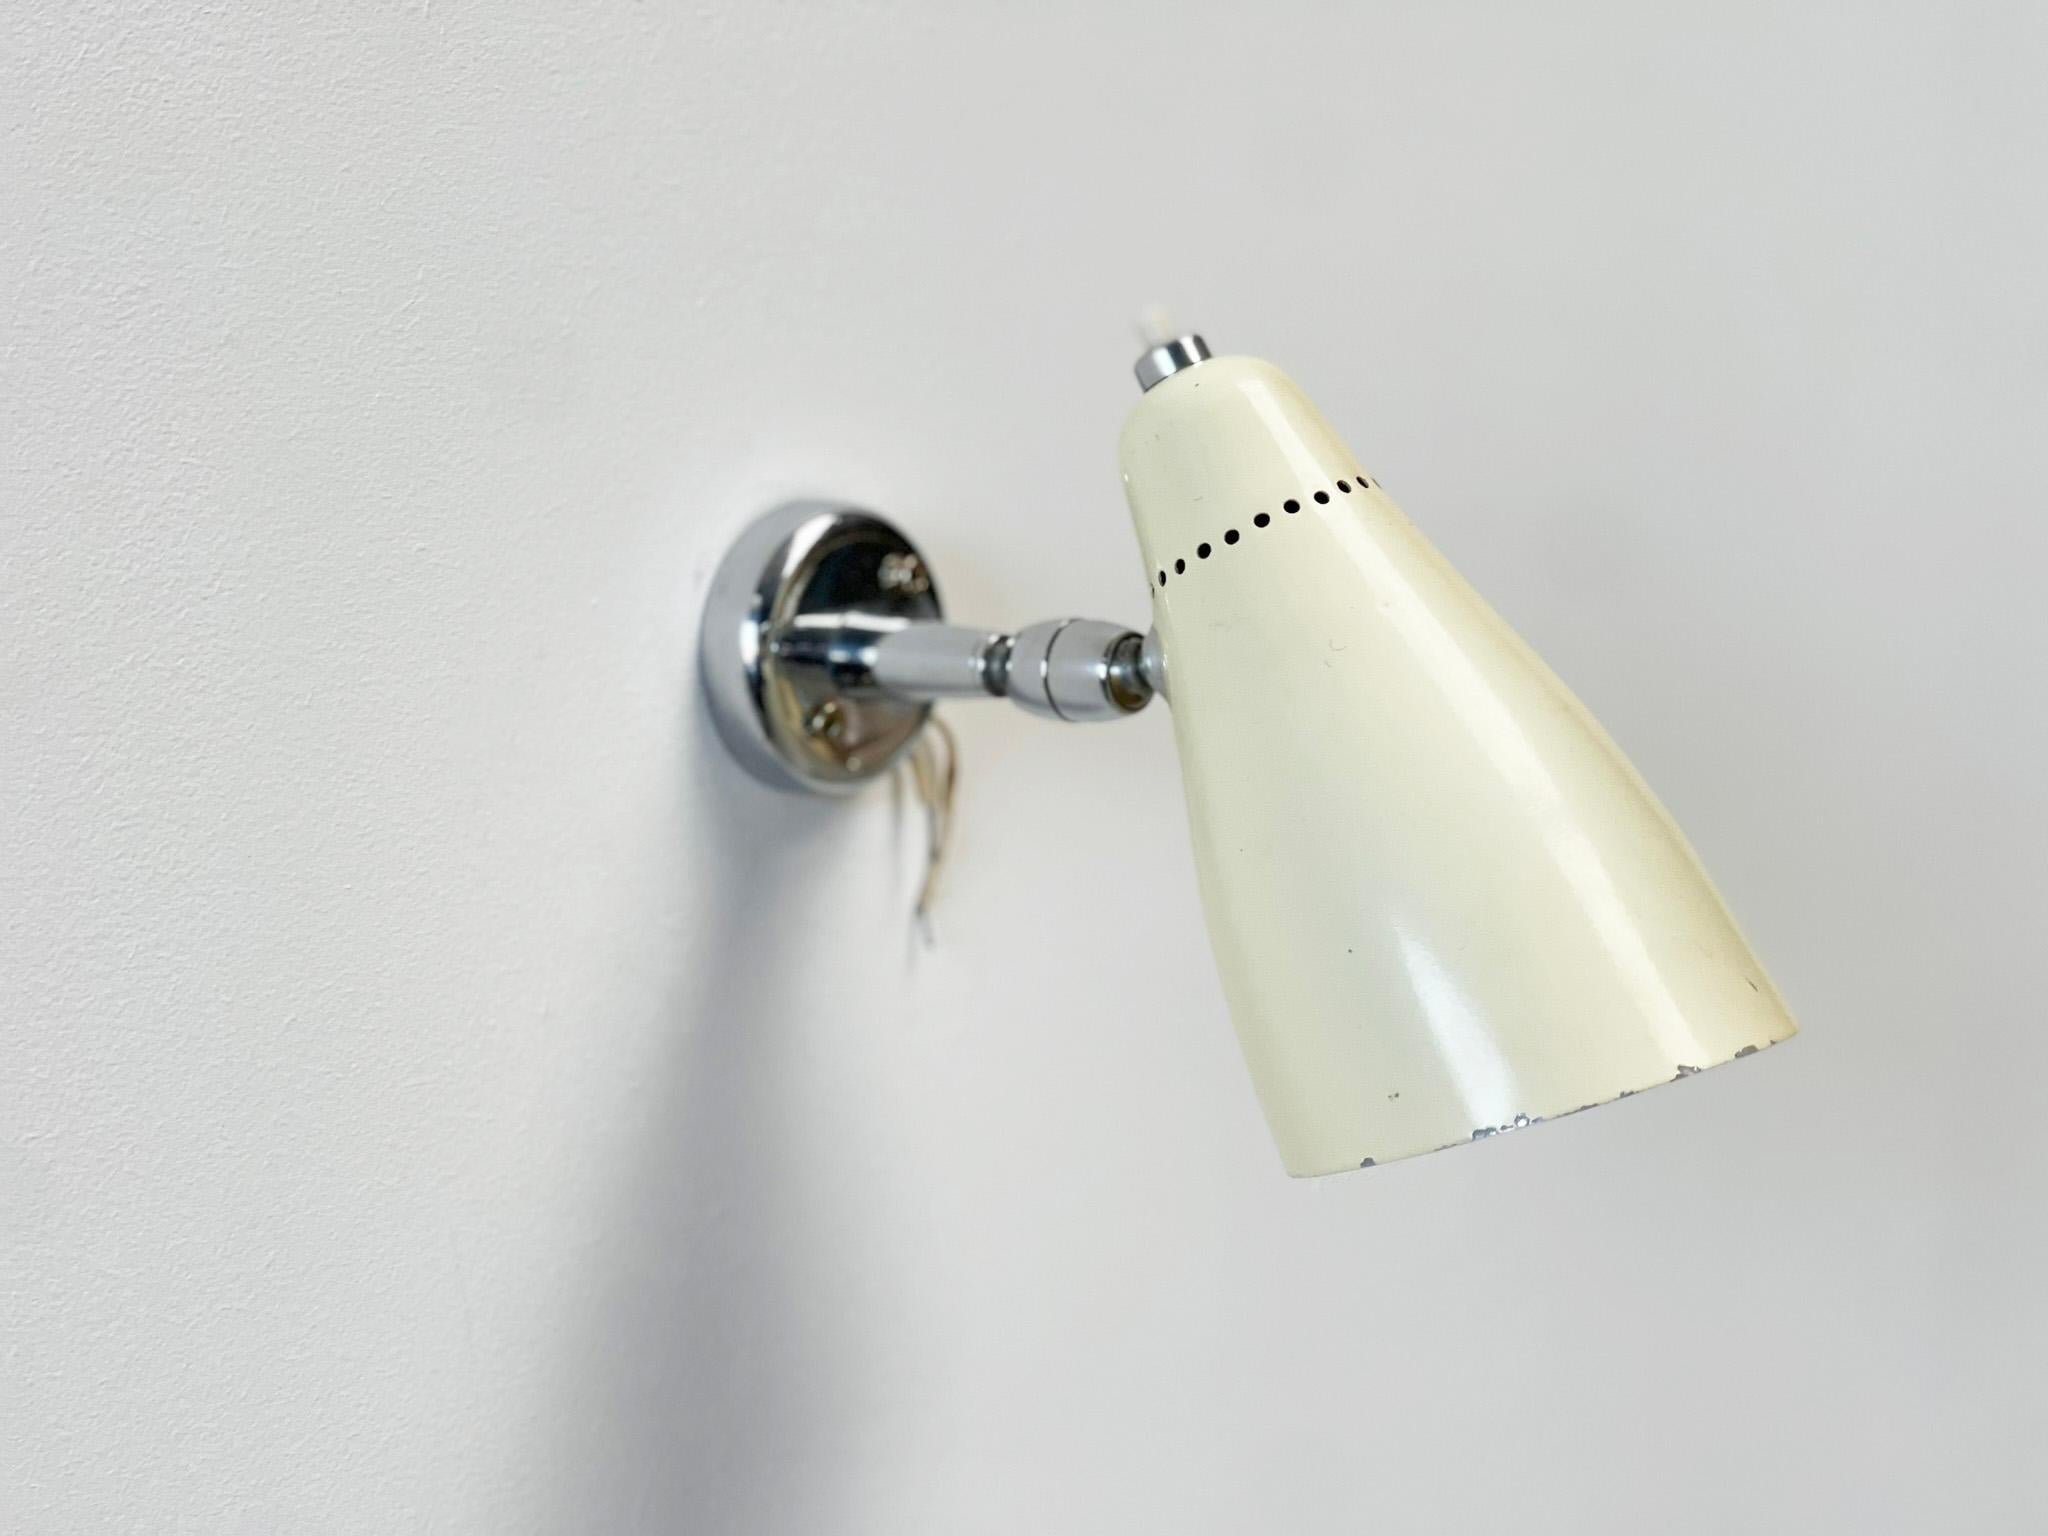 Nice wall lamp designed by Giuseppe Ostuni . These are typical elegant lamps from the 50's. This one has a very nice white enamel shade with chrome wall bracket. 

This is a very good example of the typical 50's Italian lamps